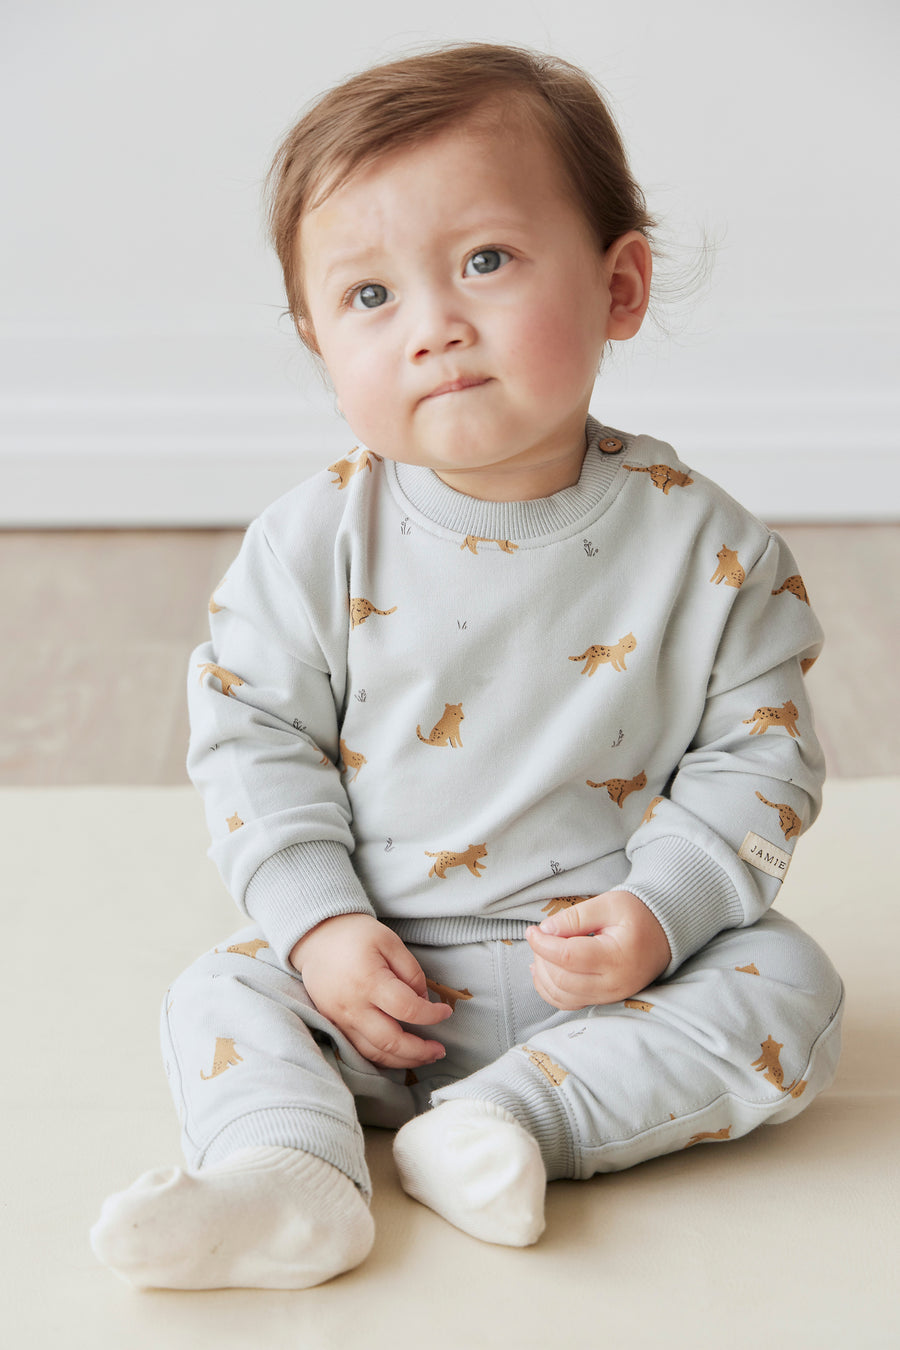 Organic Cotton Jalen Track Pant - Lenny Leopard Ocean Spray Childrens Pant from Jamie Kay NZ